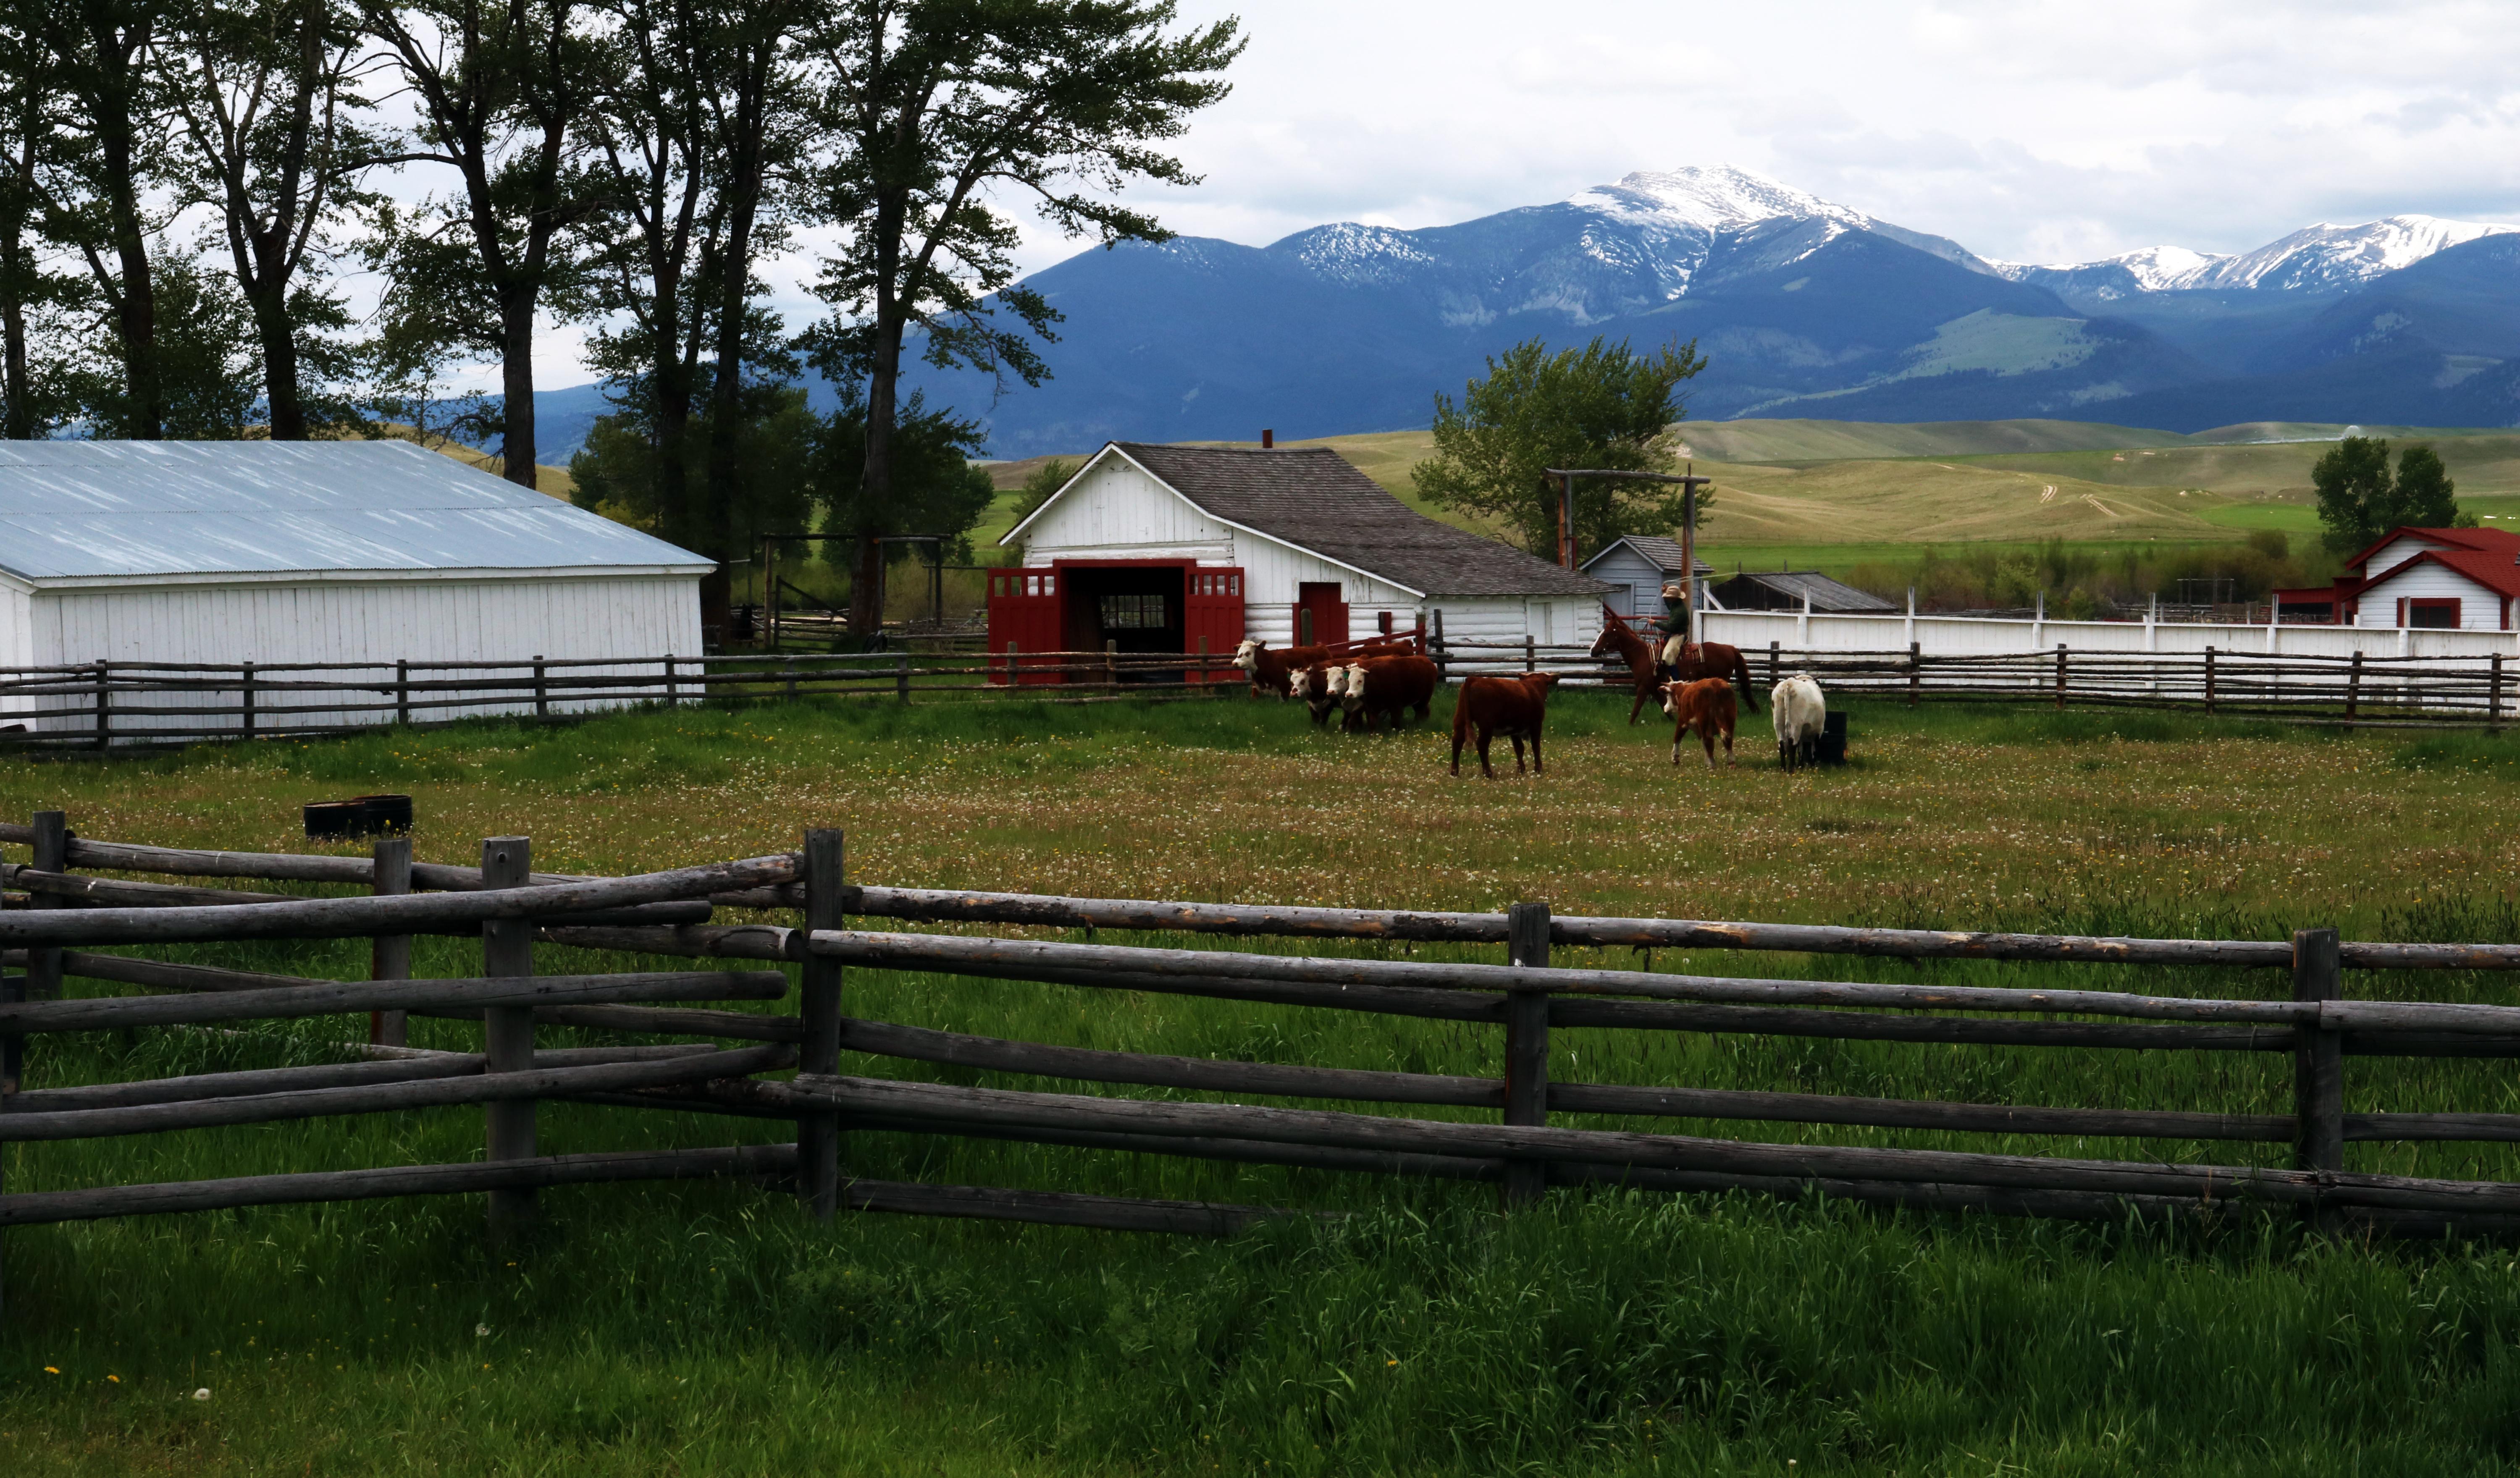 Historic buildings surround fenced pasture, cattle being moved by cowboy on horseback toward viewer.